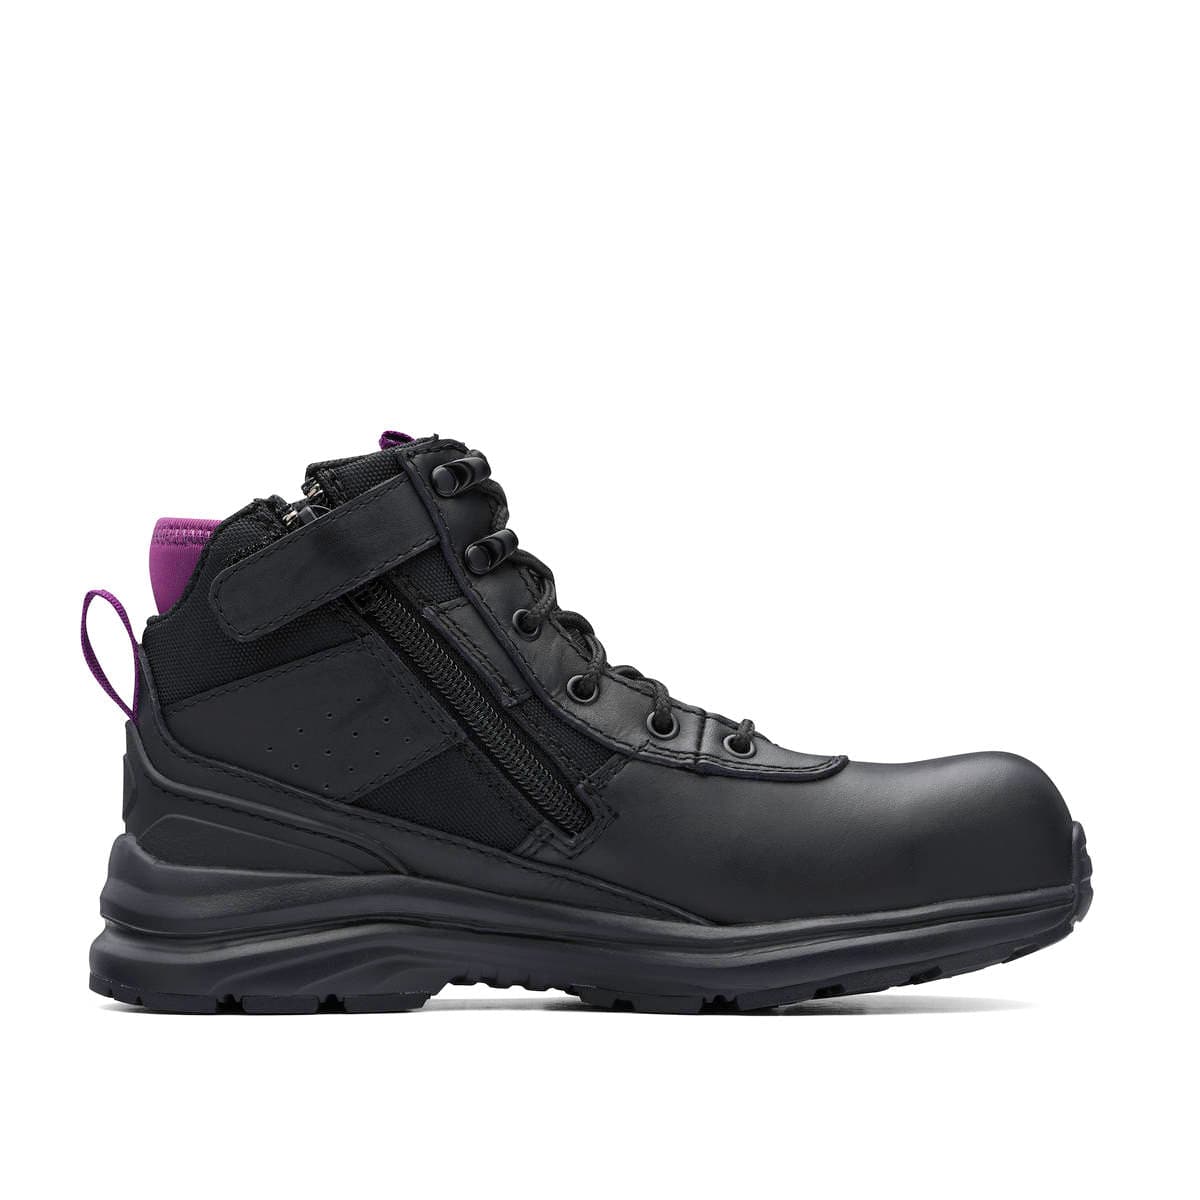 Blundstone Women's Safety Series - Safety Joggers - Black and Purple #887